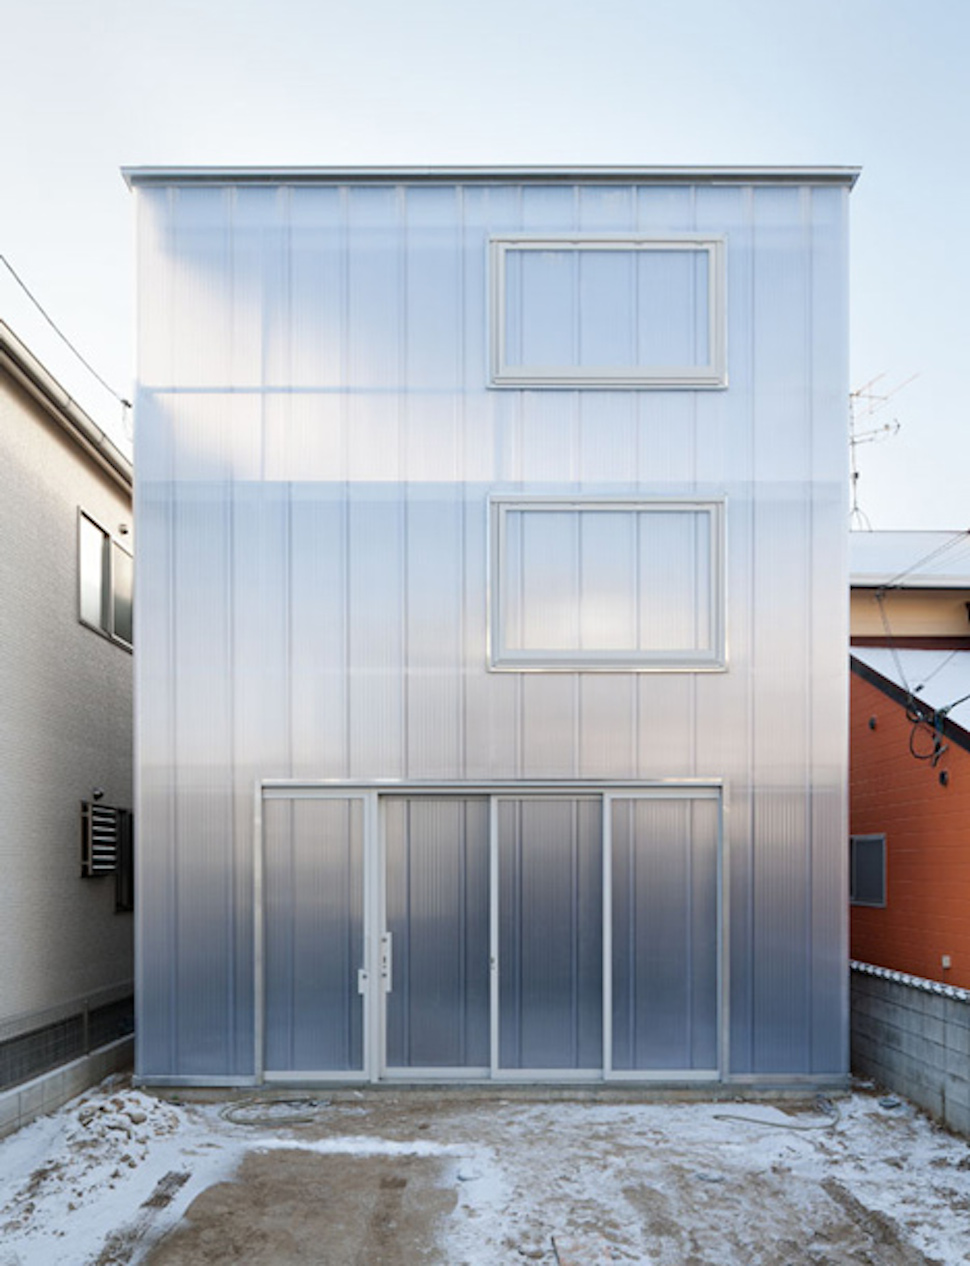 Wouldn’t It Be Fun To Live In A Translucent House?